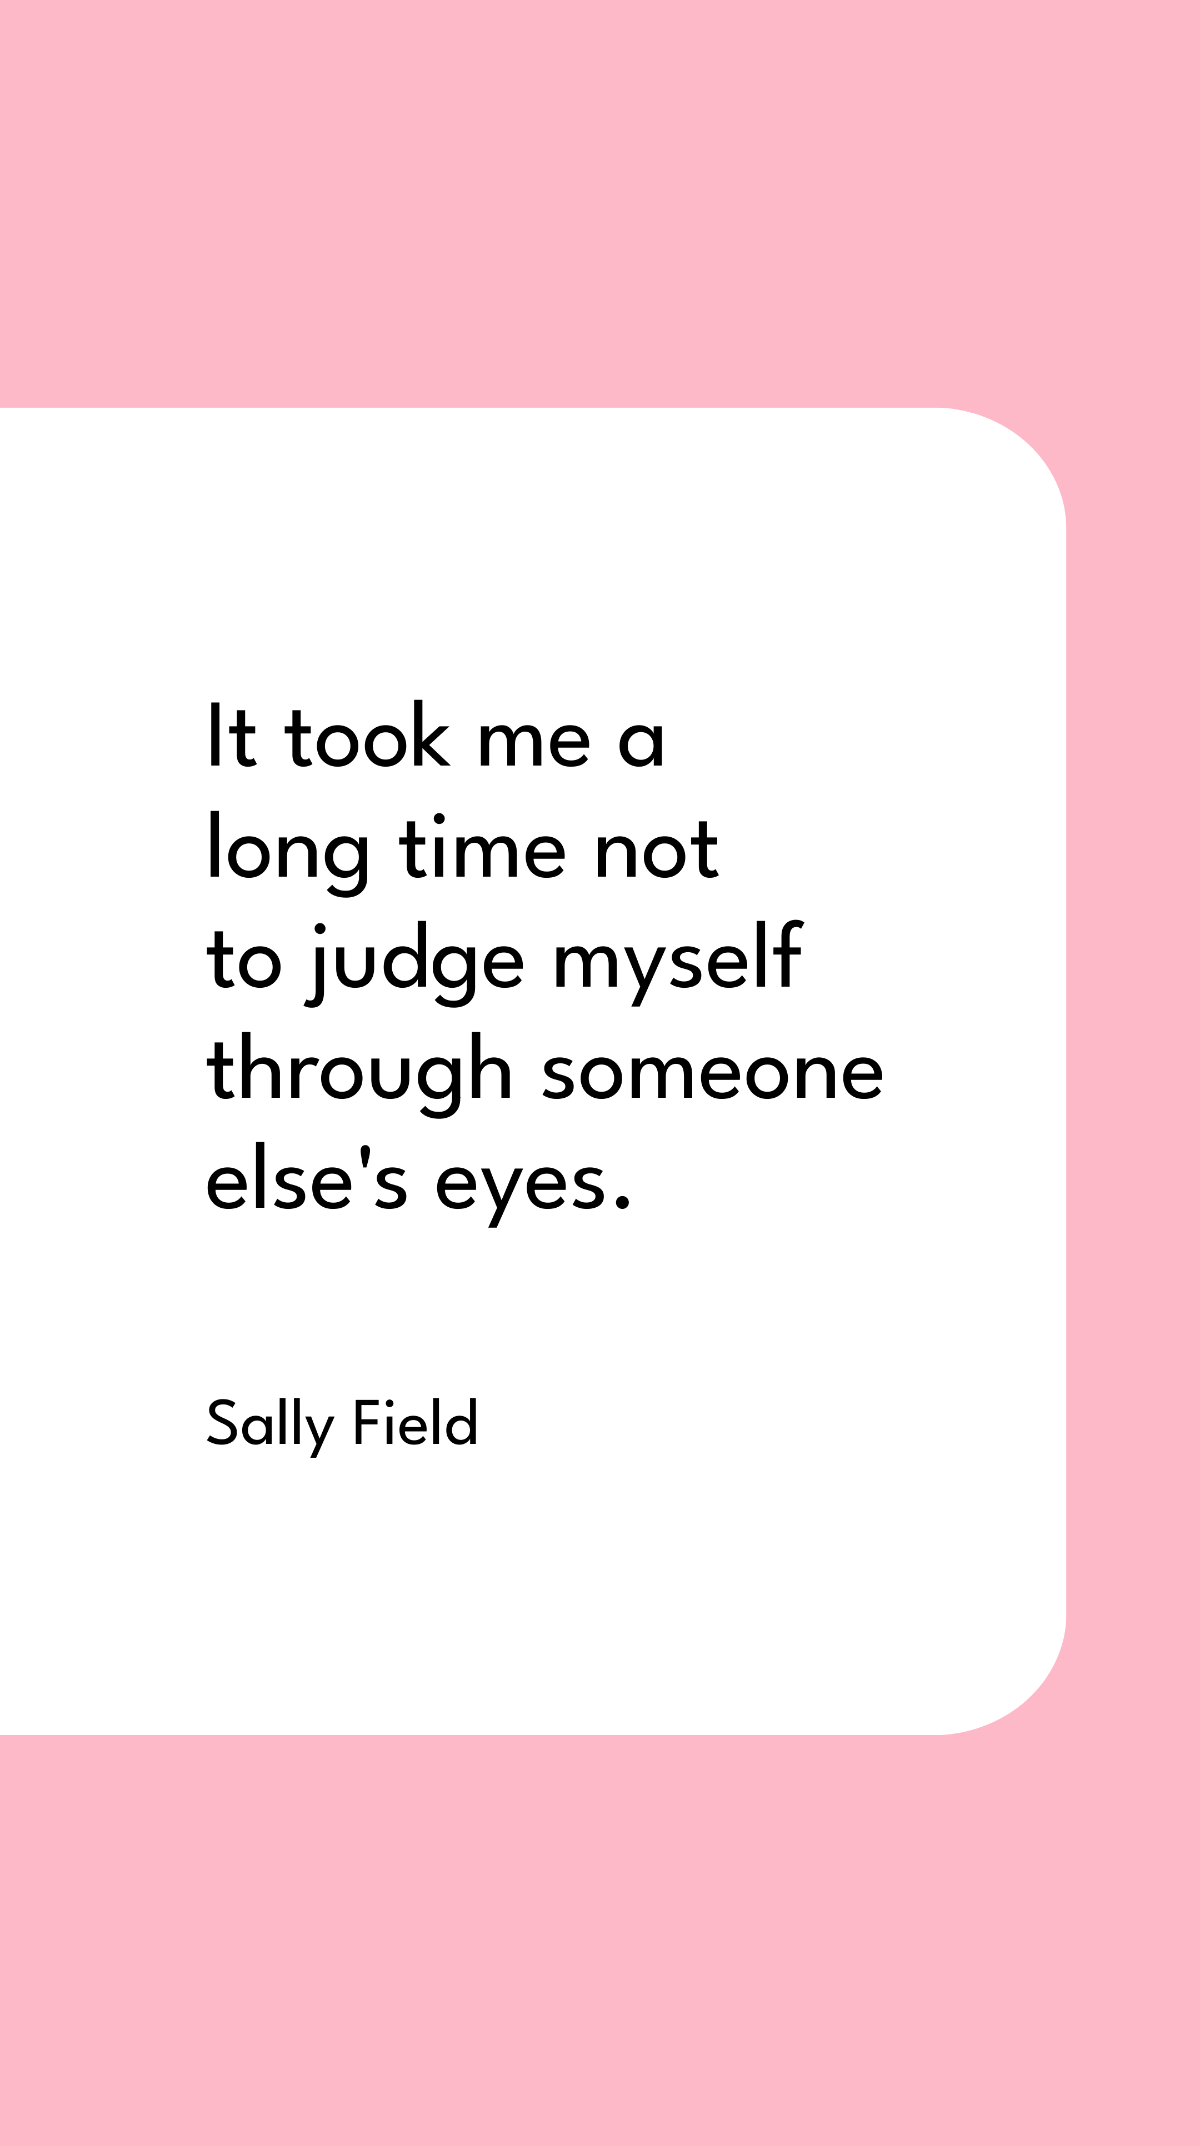 Sally Field - It took me a long time not to judge myself through someone else's eyes. Template